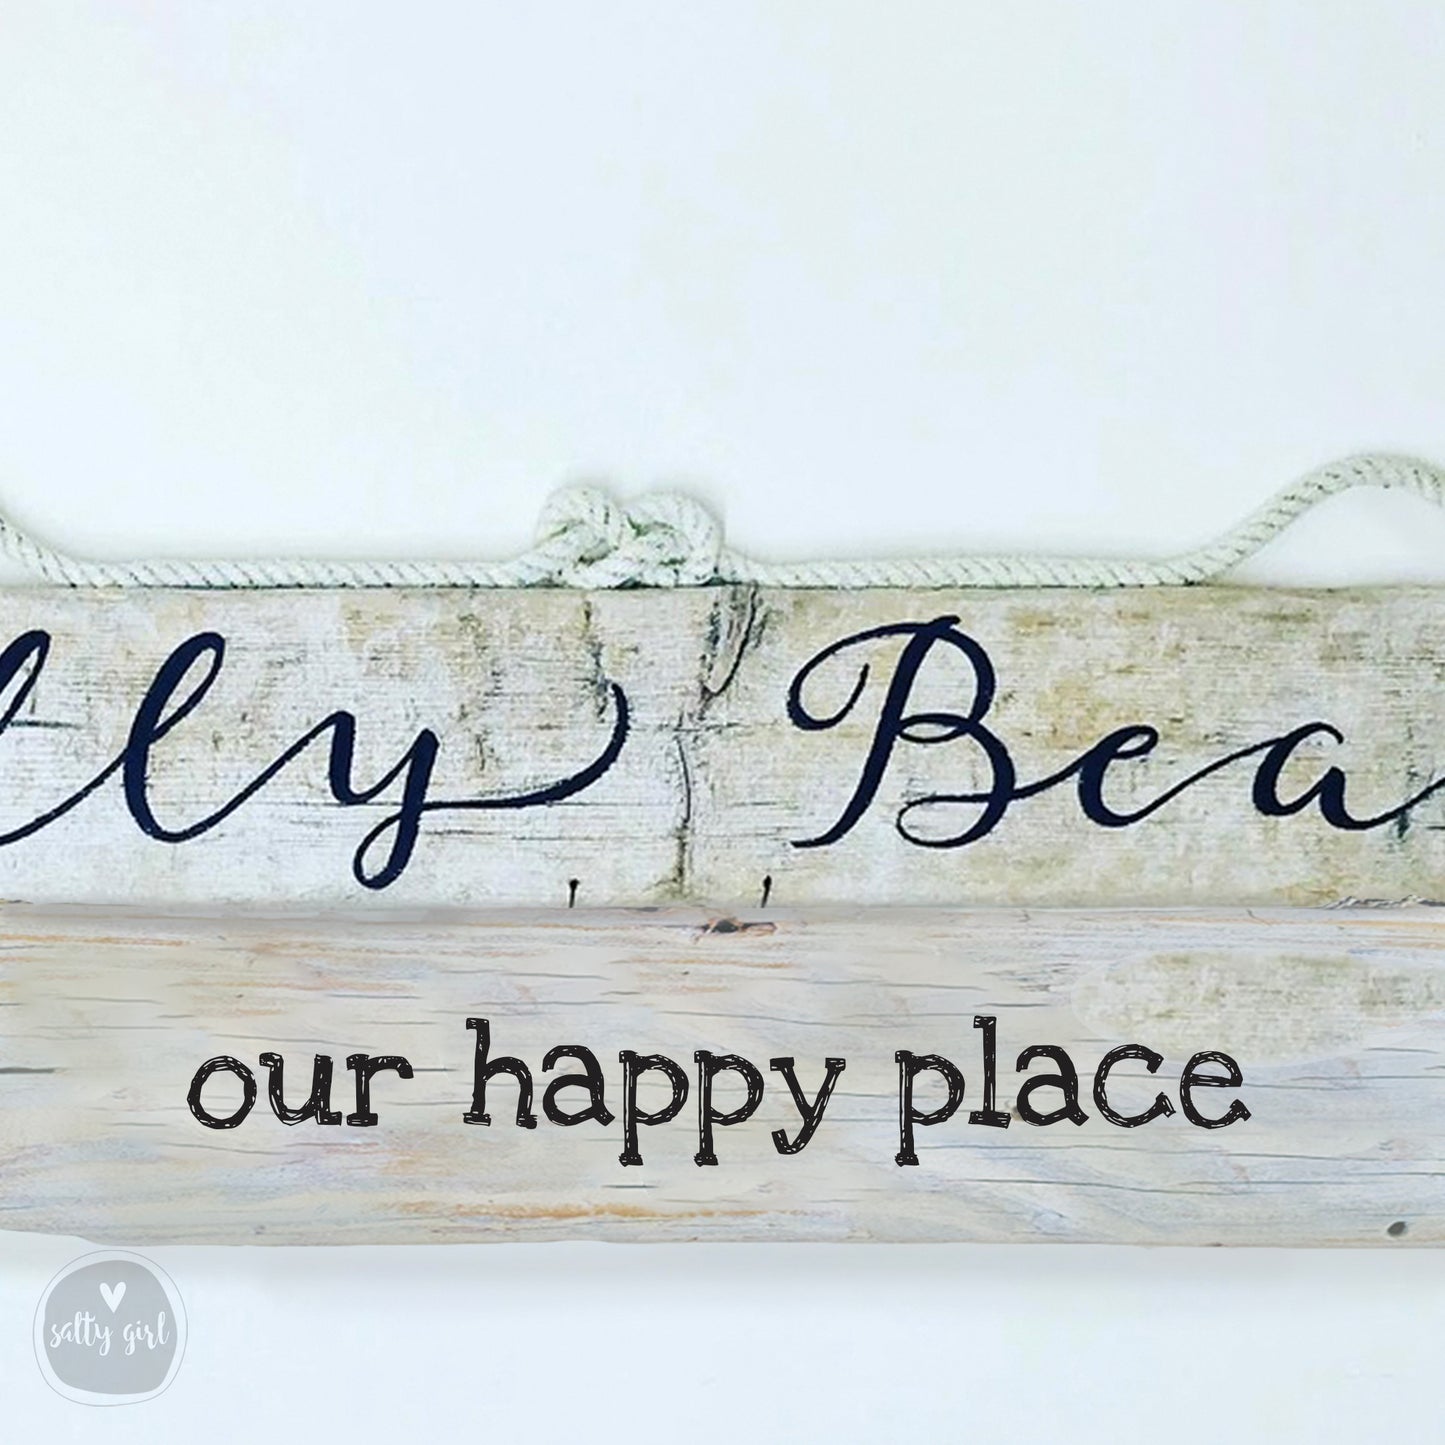 Custom Double Plank Driftwood Sign - Summer Cottage Sign with Fishing Rope Hanger - Personalized Wooden Sign